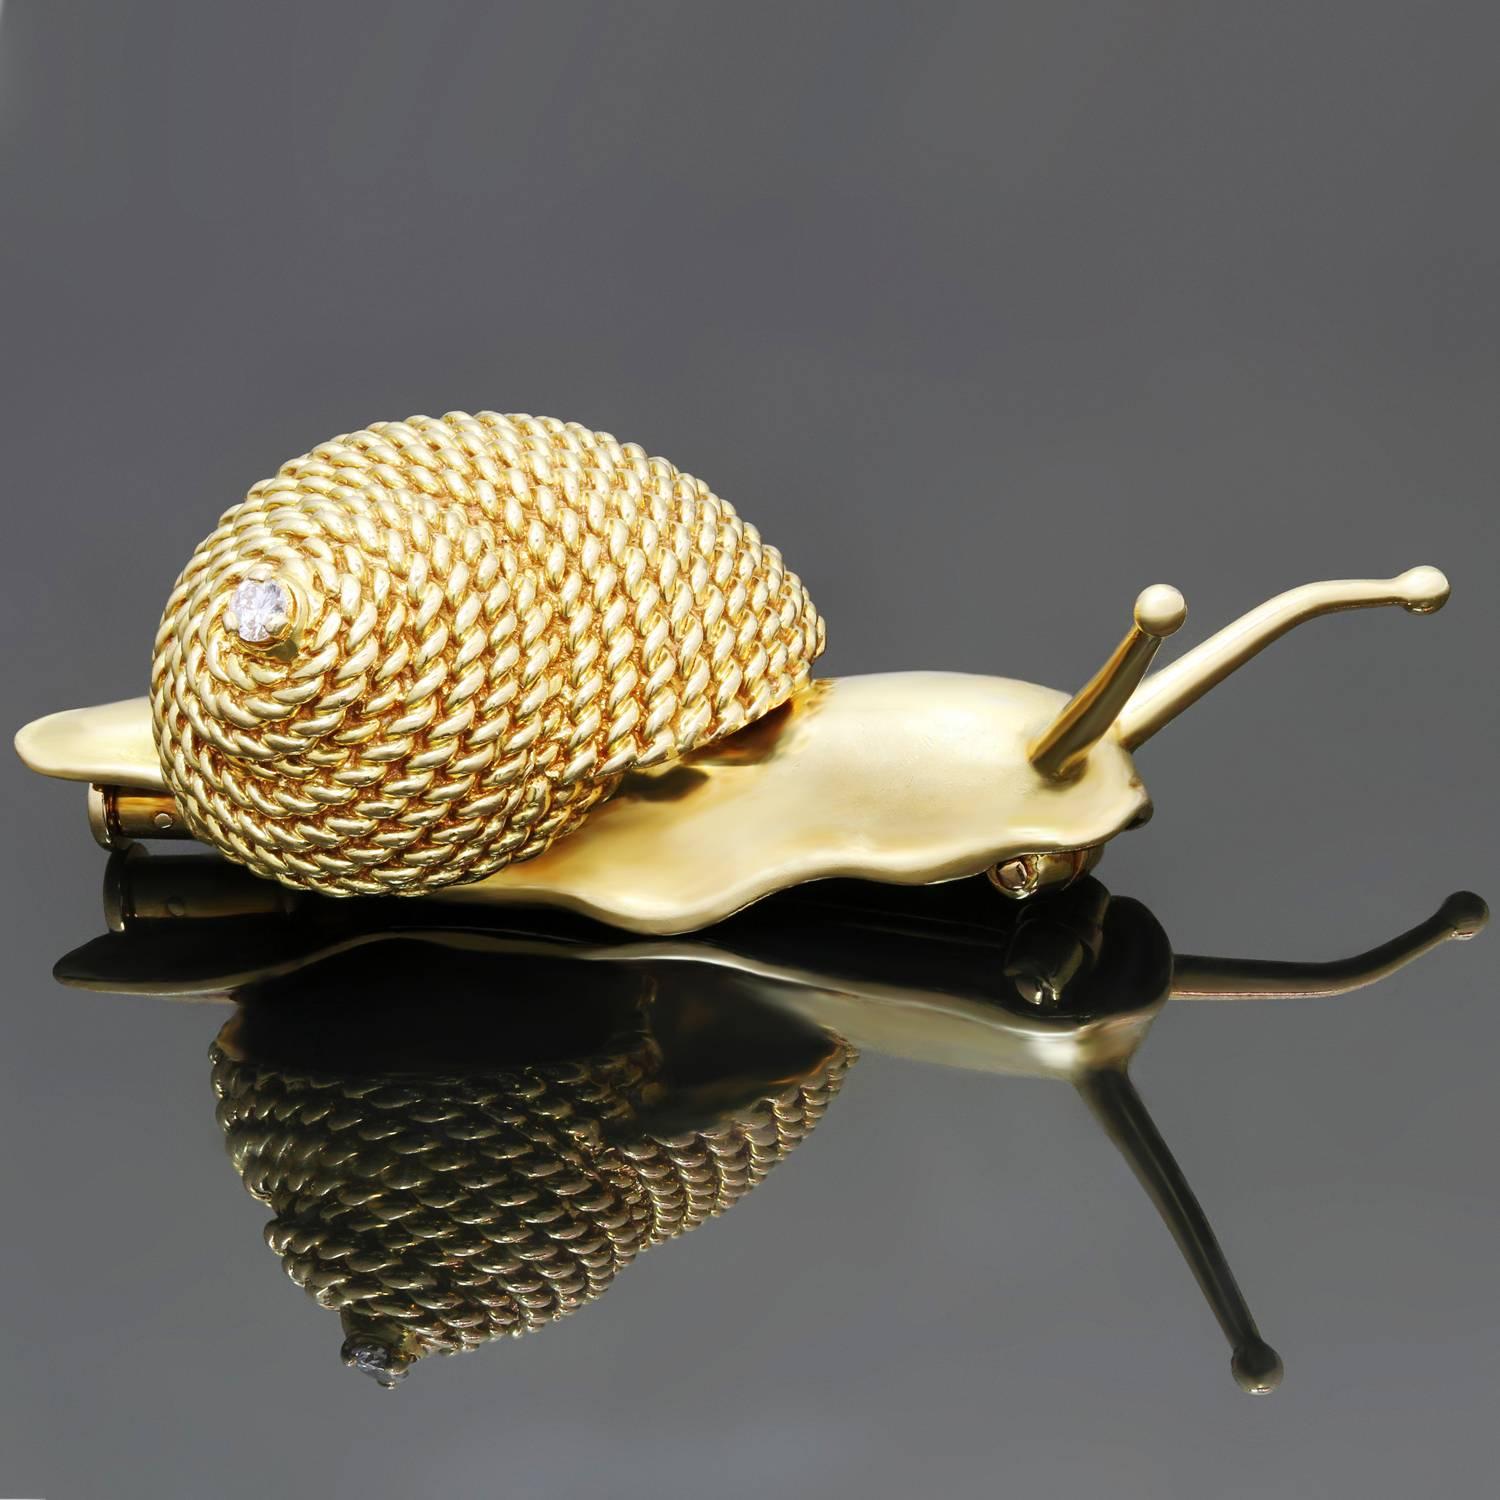 This rare Hermes brooch is crafted in 18k yellow gold in a shape of an adorable snail with high polish details and a textured twisted wire motif accented with a solitaire brilliant-cut round diamond of an estimated 0.04 carats. Signed Hermes, Paris